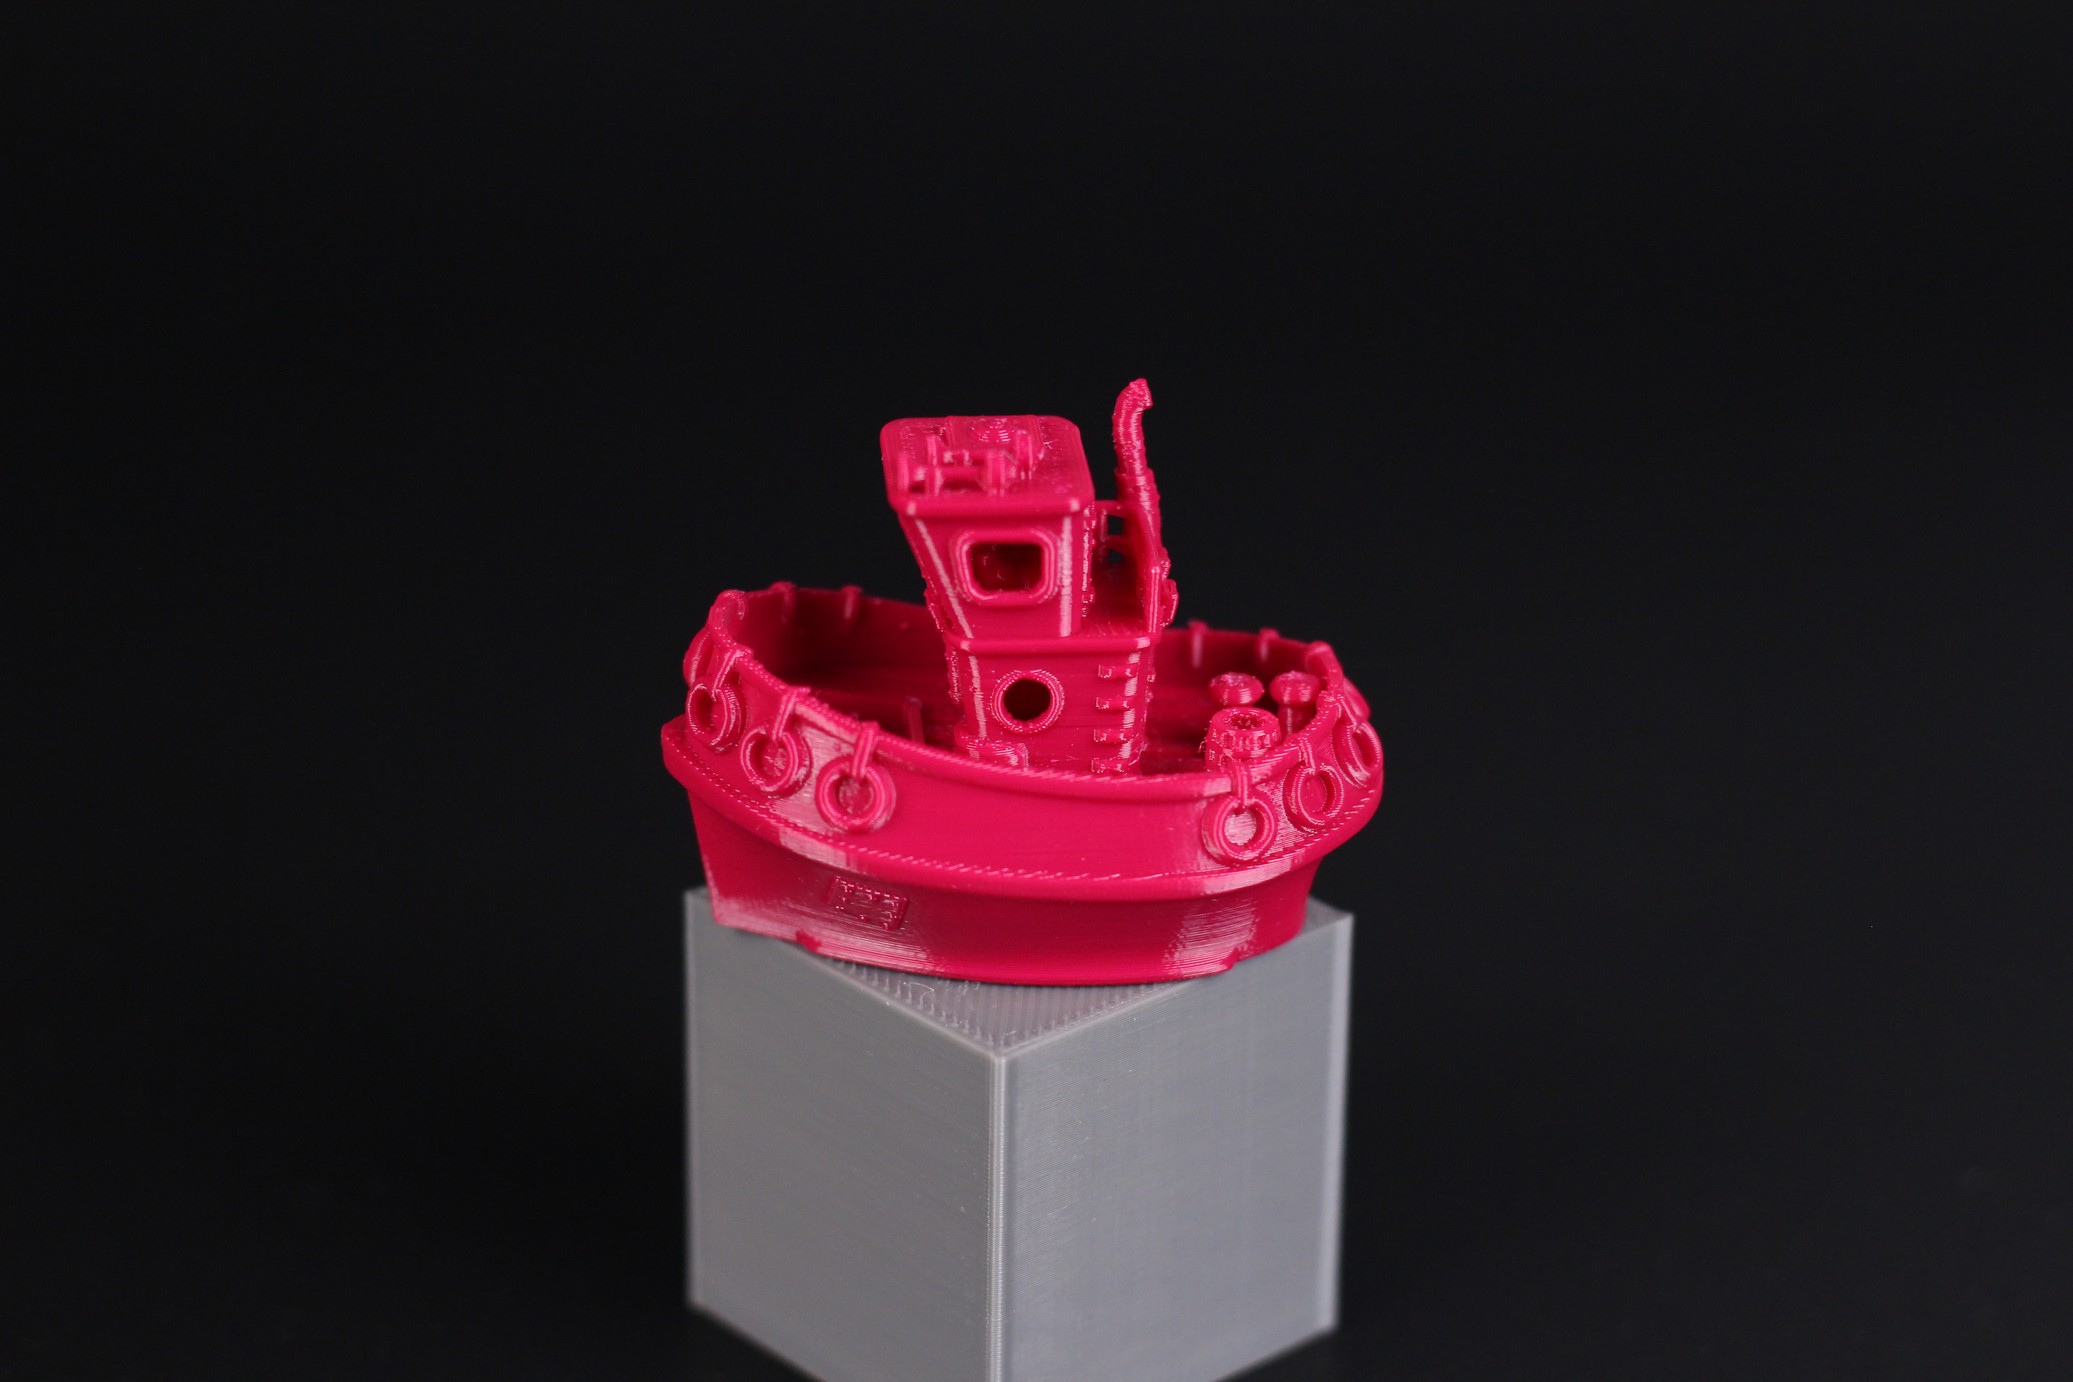 PETG Tubboat printed on Anycubic Kobra 5 | Anycubic Kobra Review: The New Budget Standard